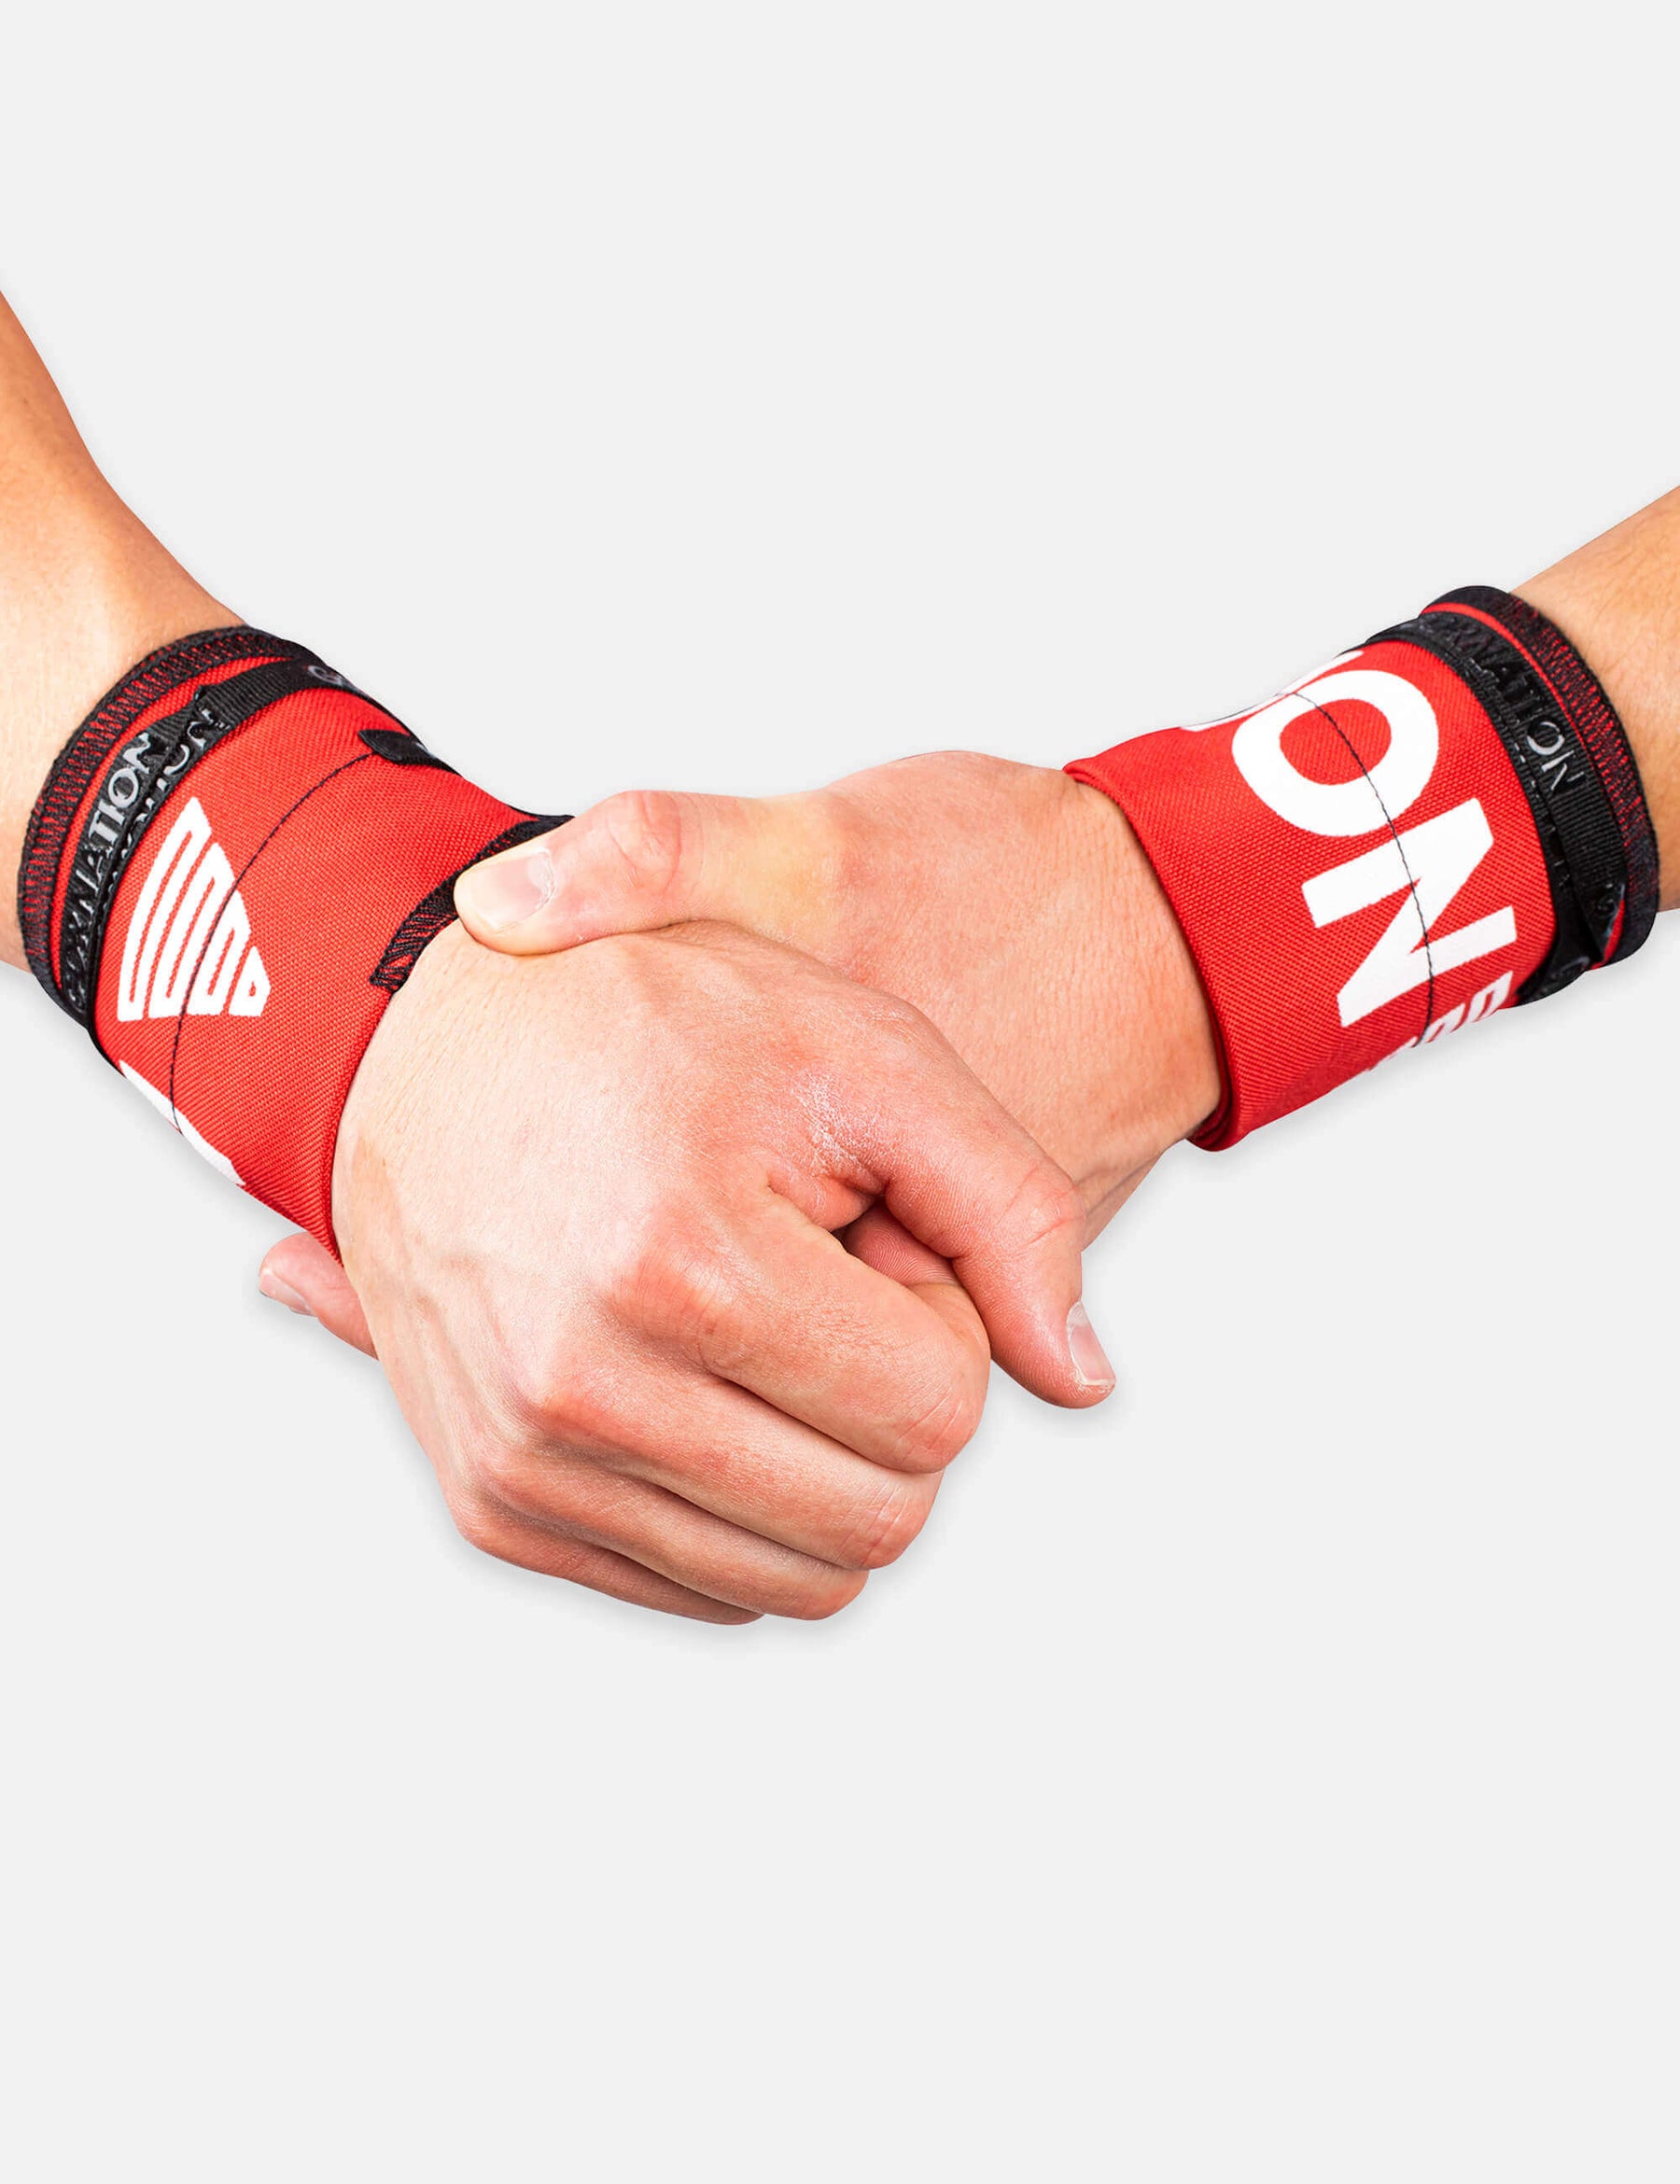 Red Gornation Wrist wraps with tight fit, adjustable wristband for wrist support and injury prevention